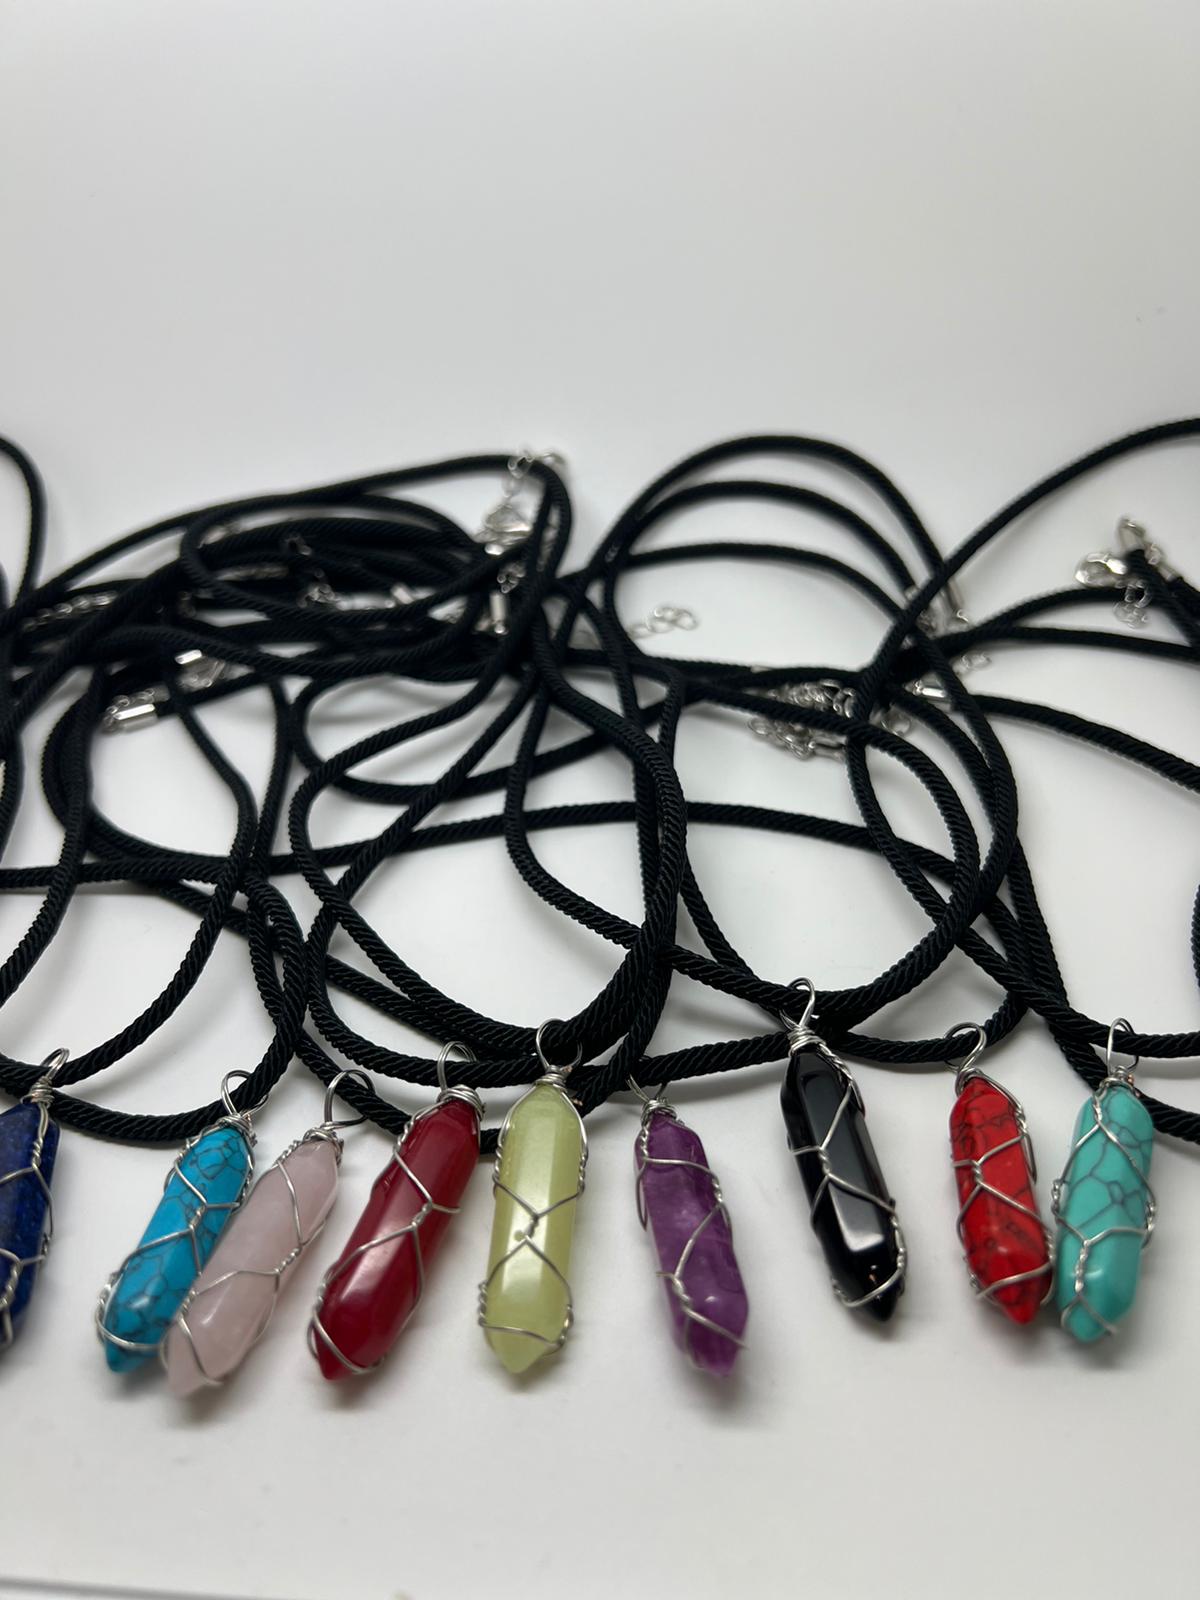 healing crystals wired shape pendant necklace Mixed Gemstone Crystal Charms